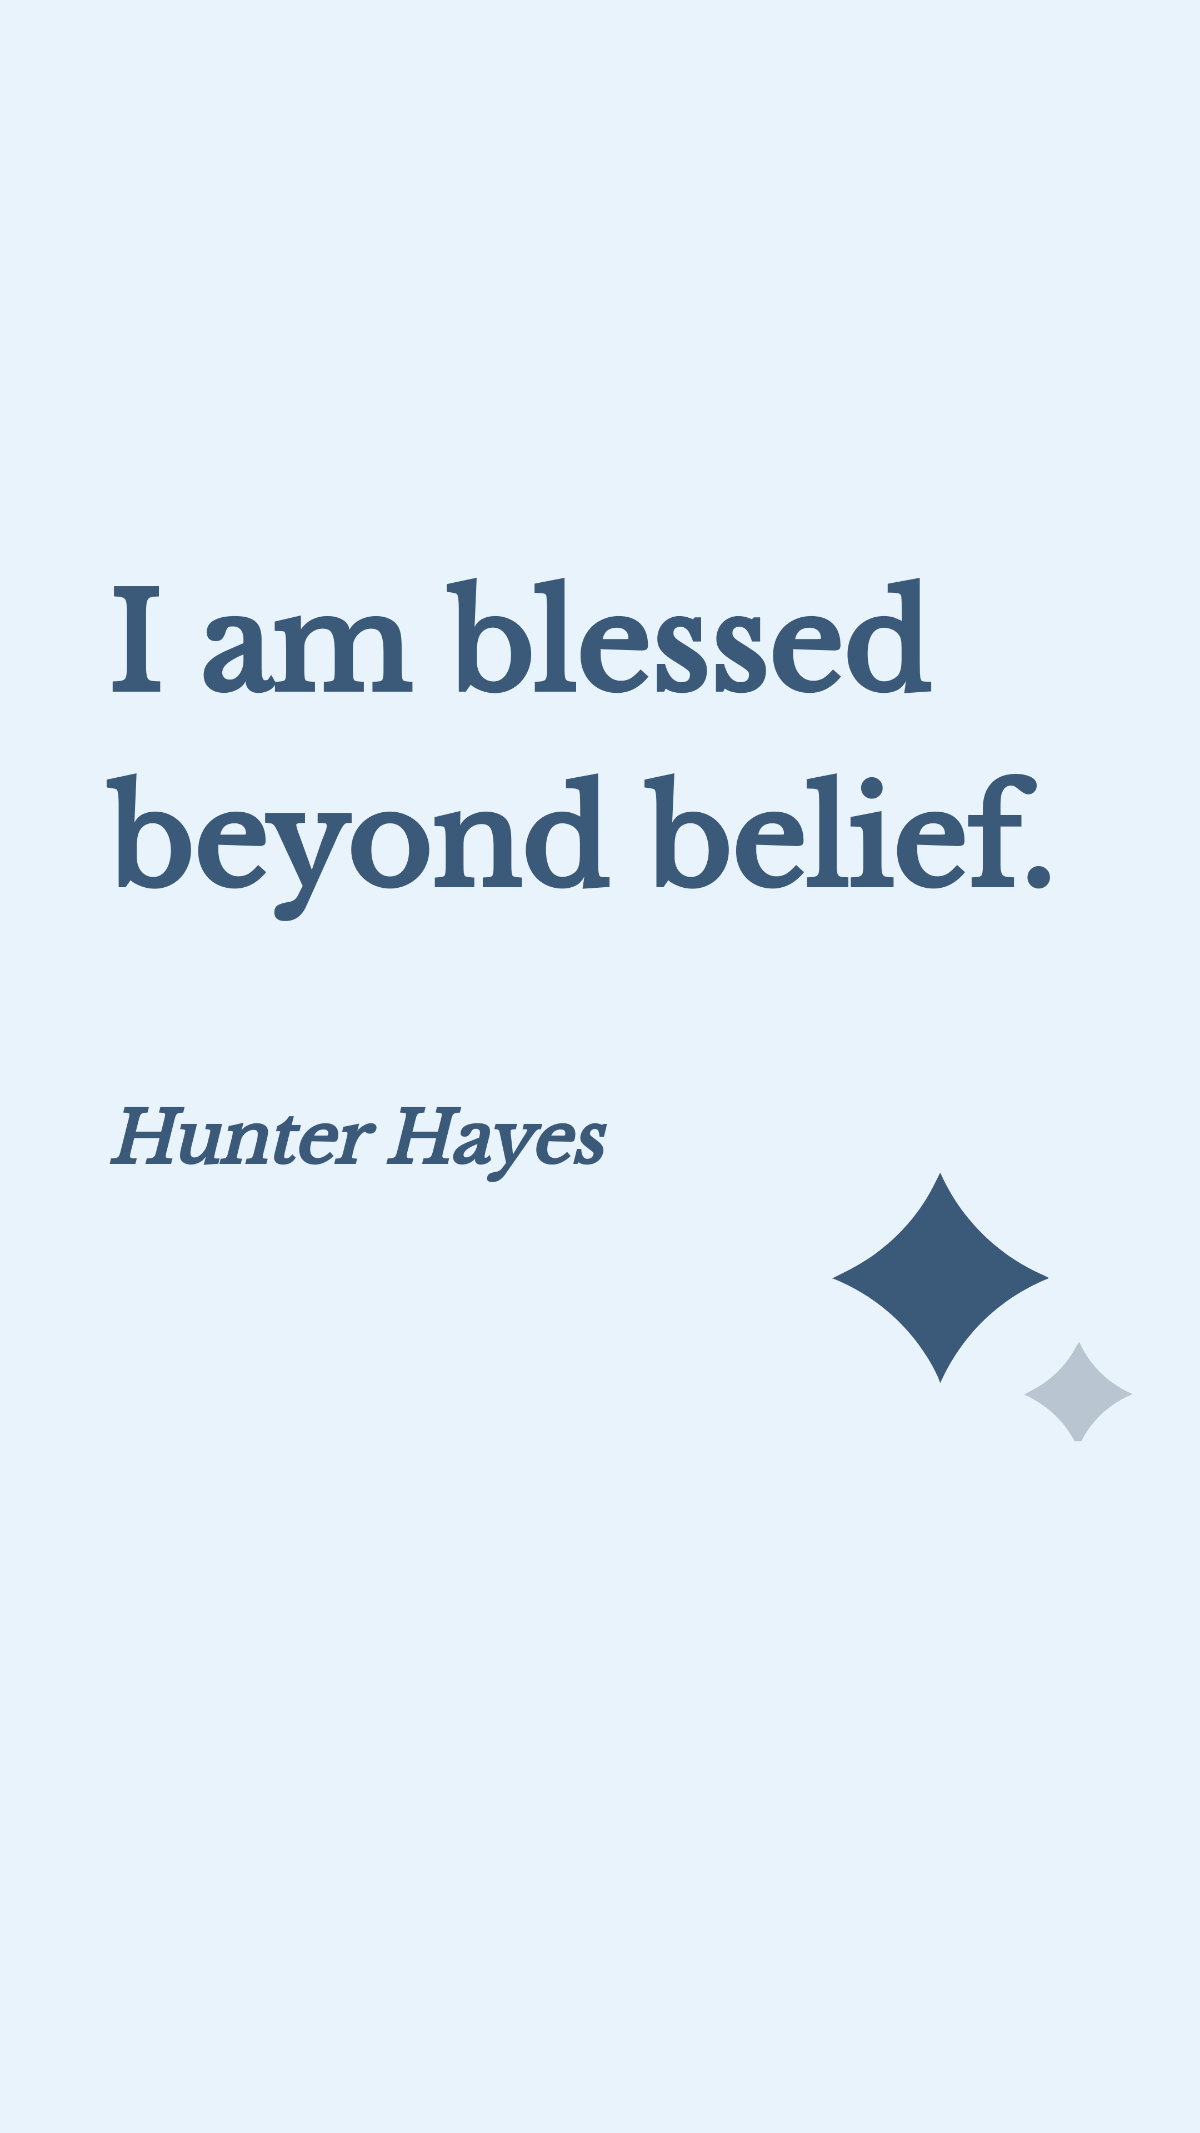 Free Hunter Hayes - I am blessed beyond belief. Template